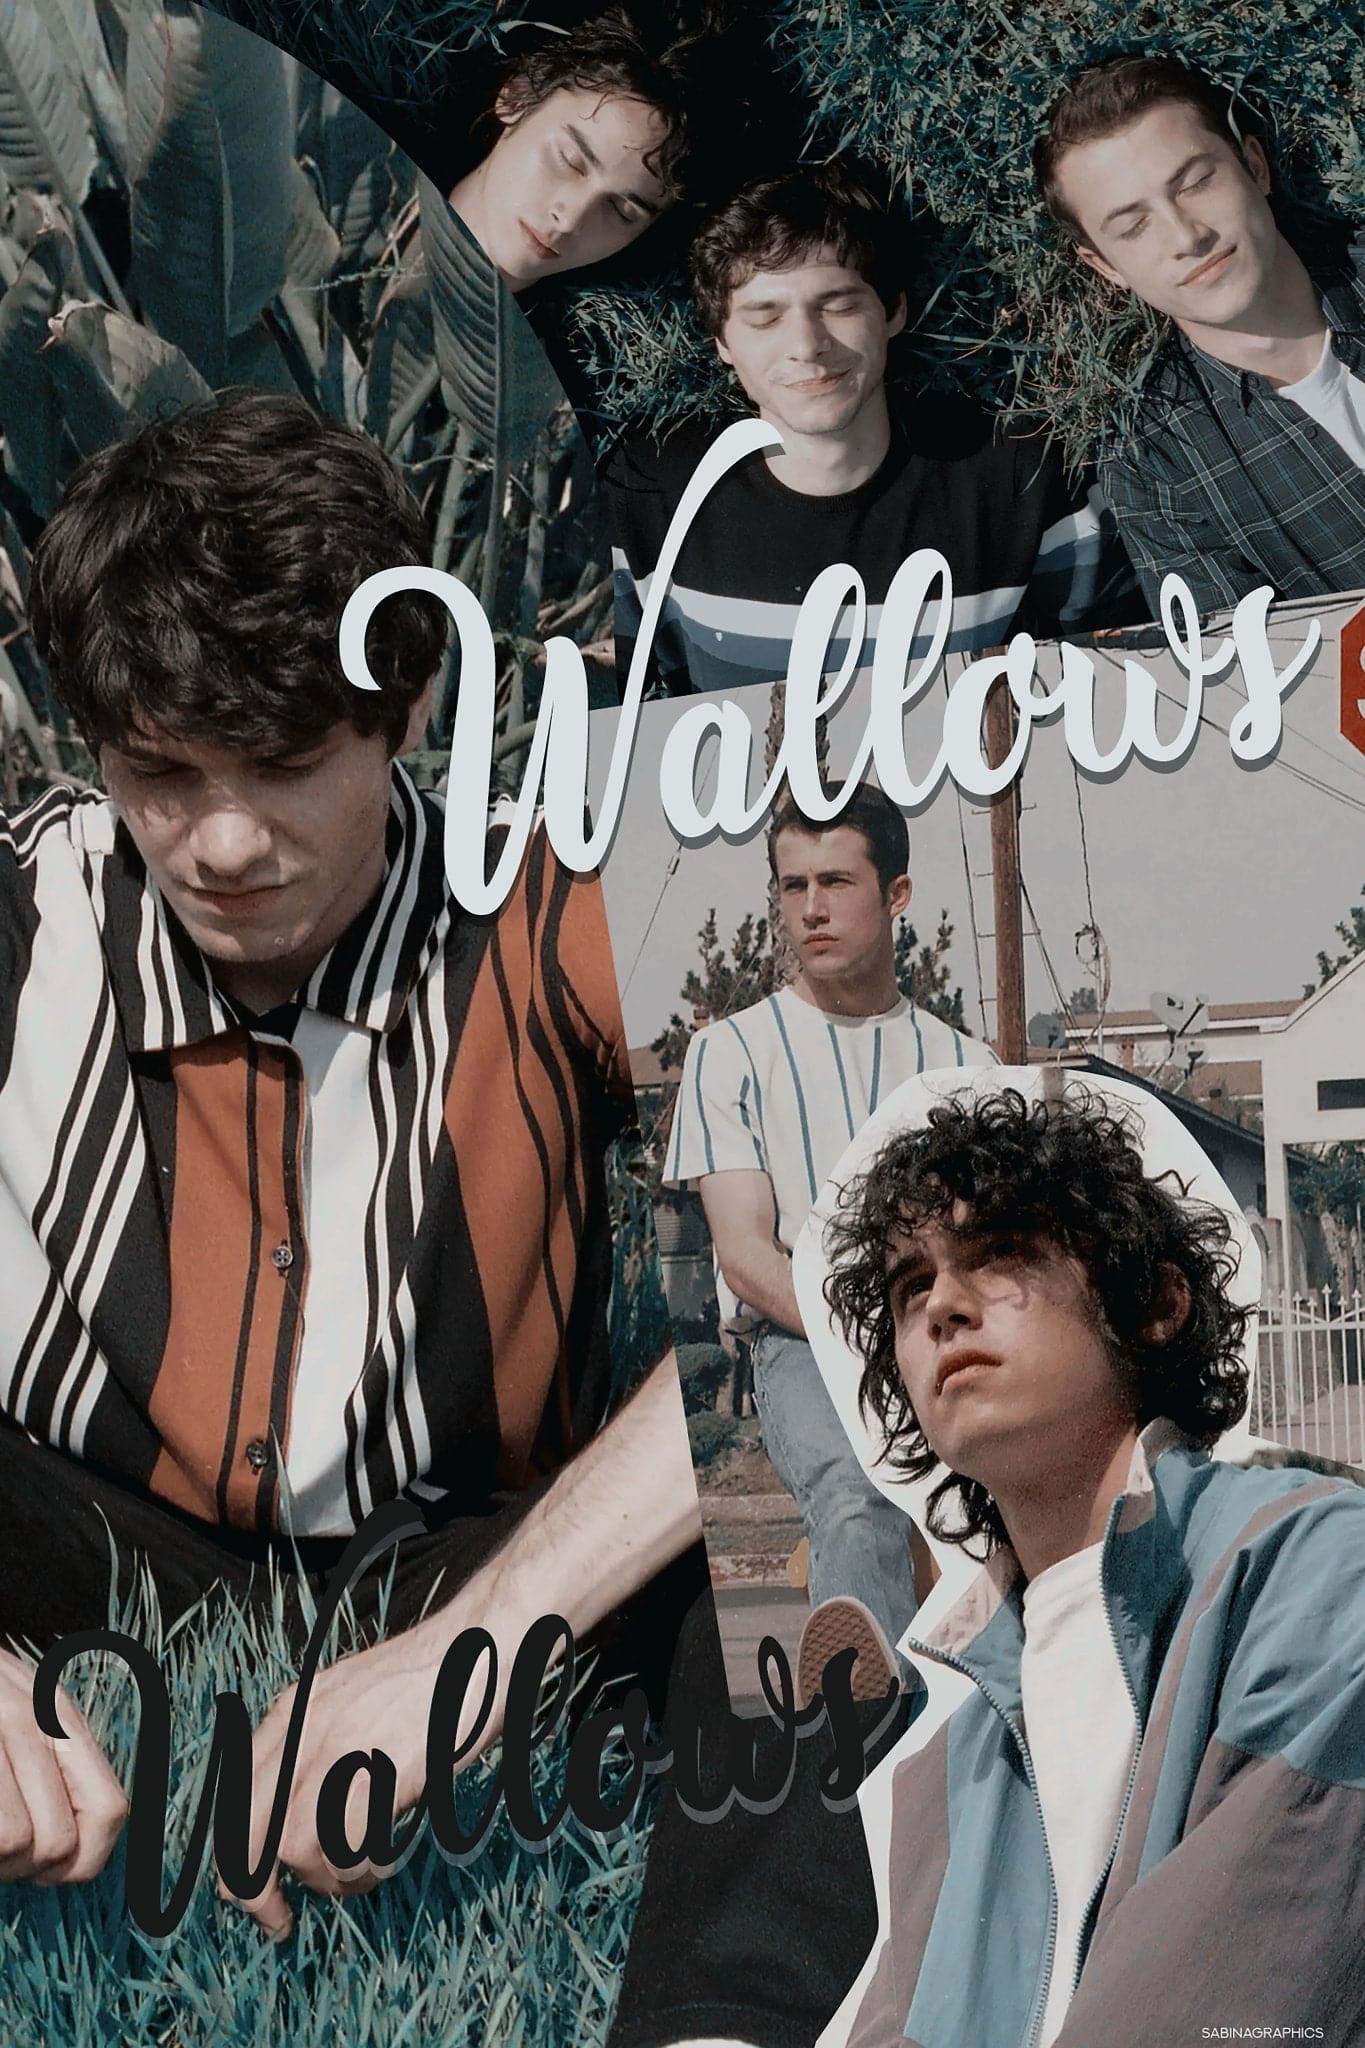 Wallows ‘Collage Style’ Poster - Posters Plug